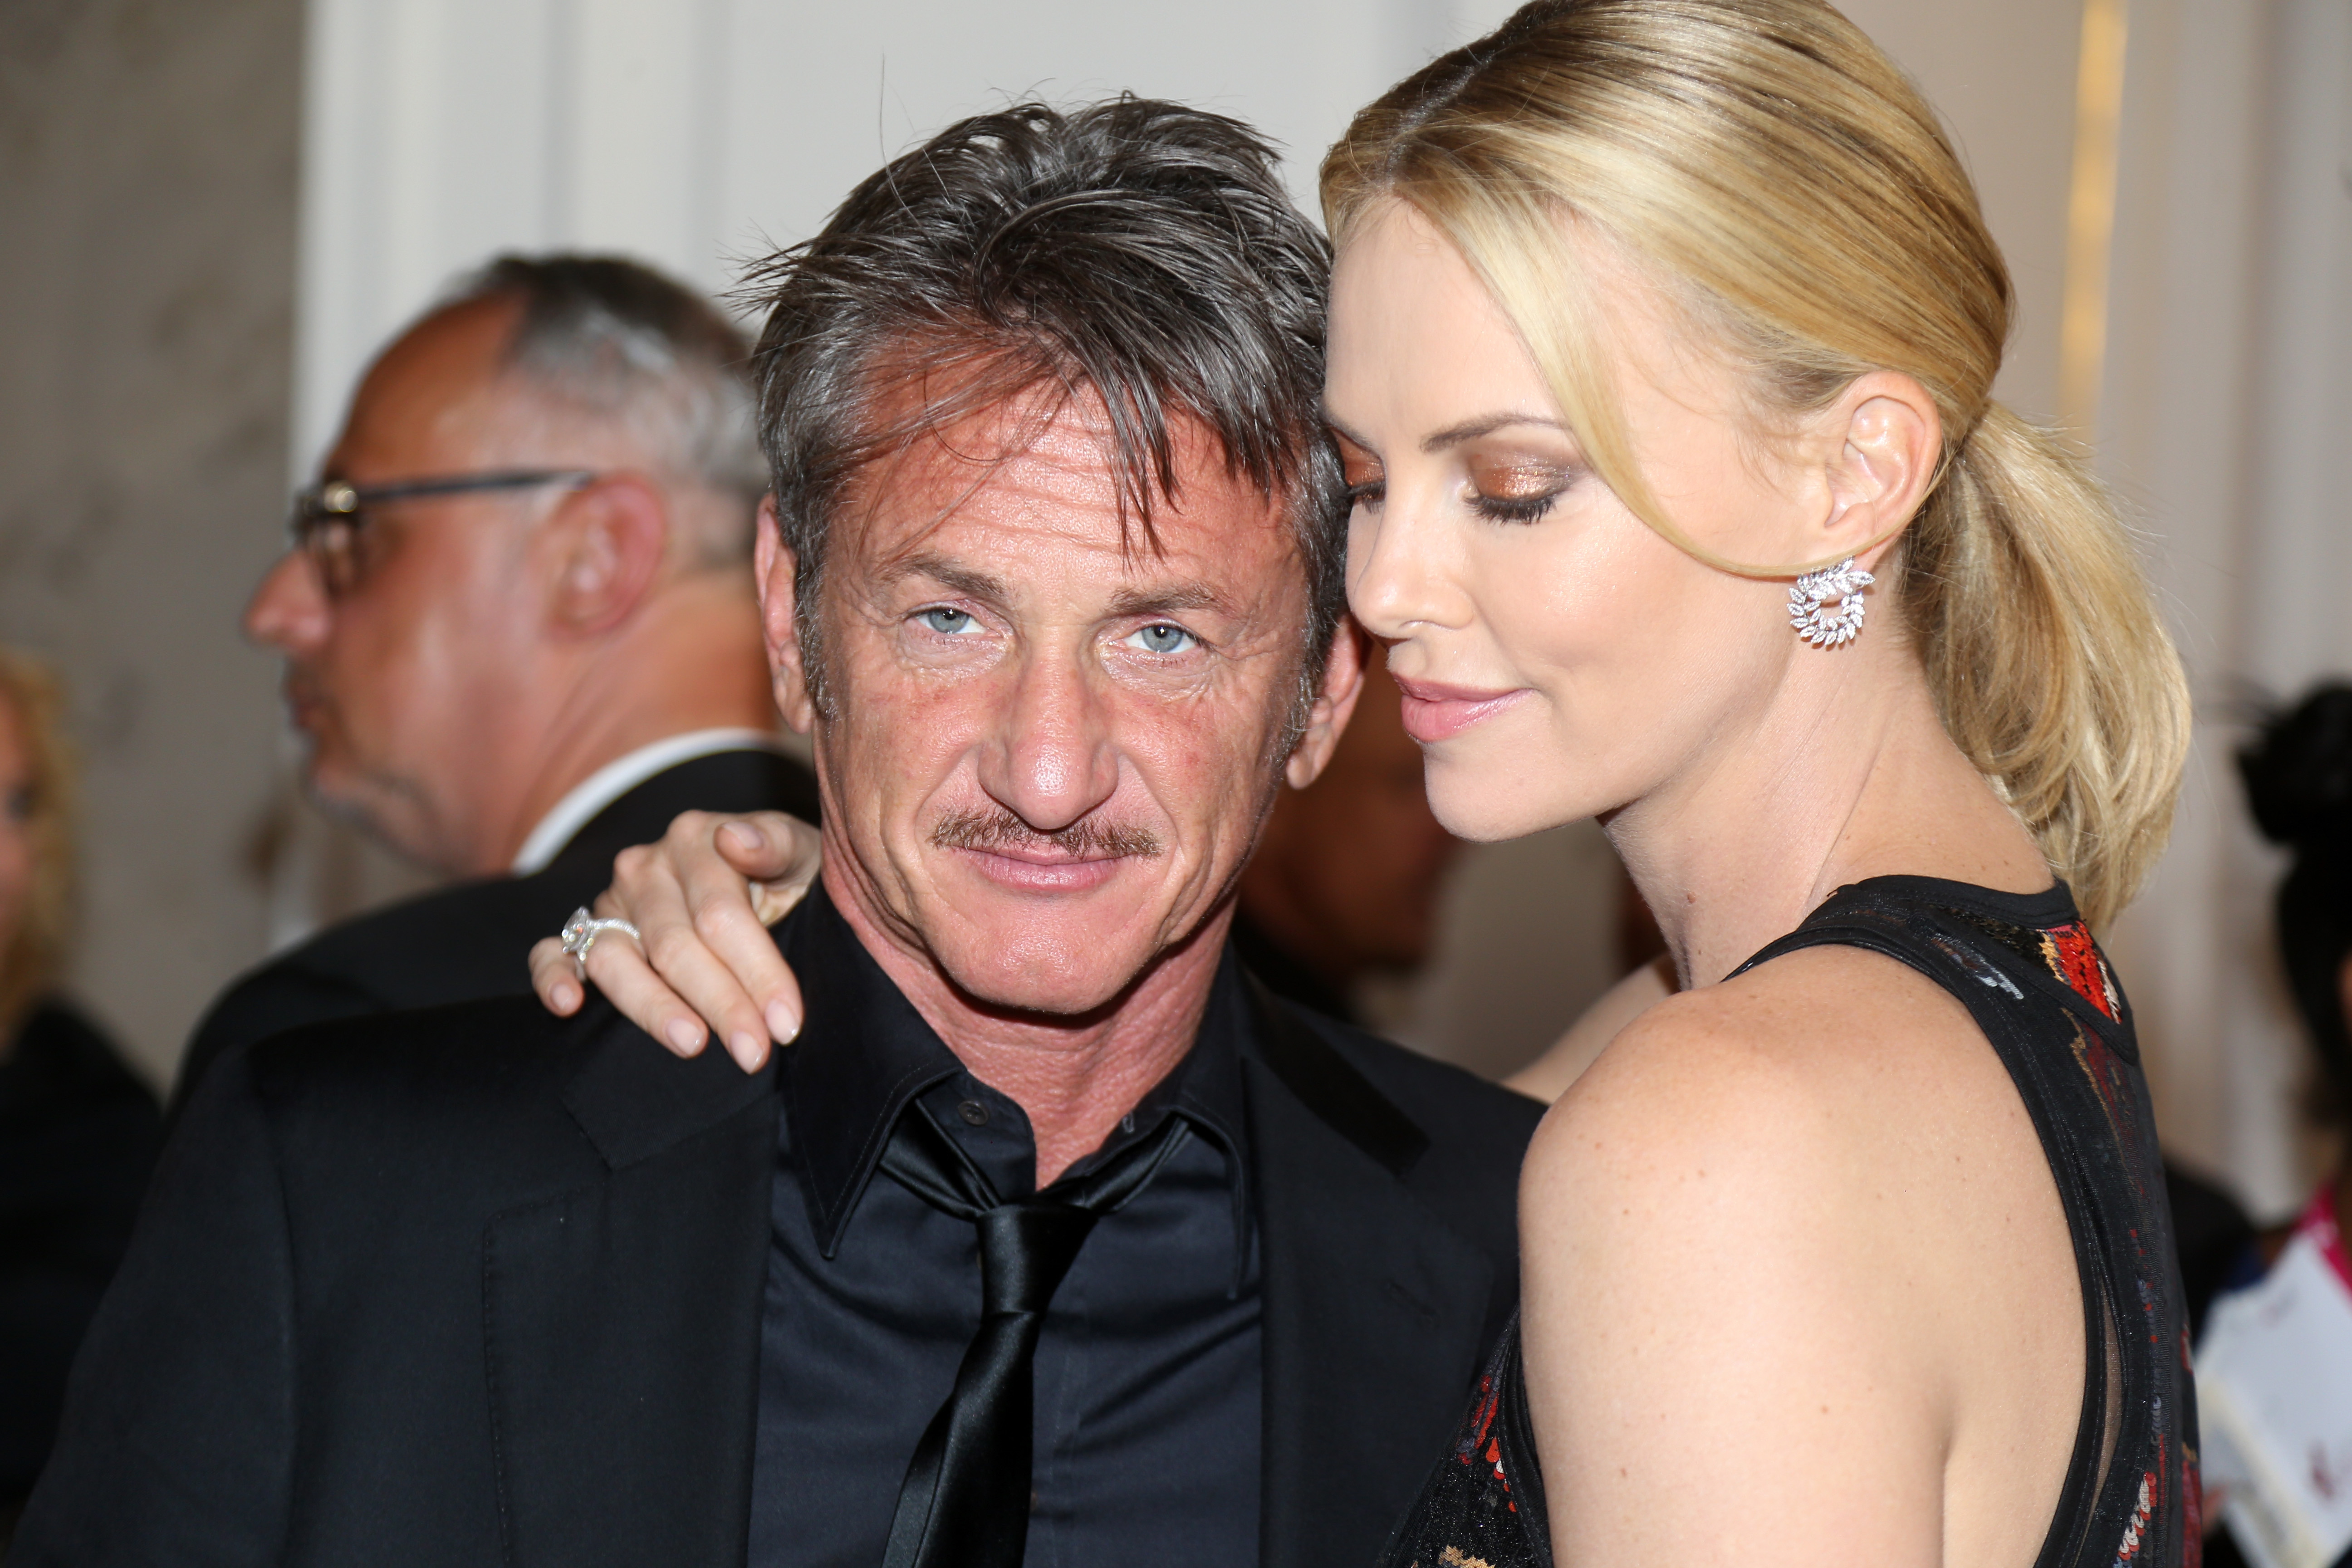 Sean Penn and Charlize Theron in Vienna, Austria on May 16, 2015 | Source: Getty Images